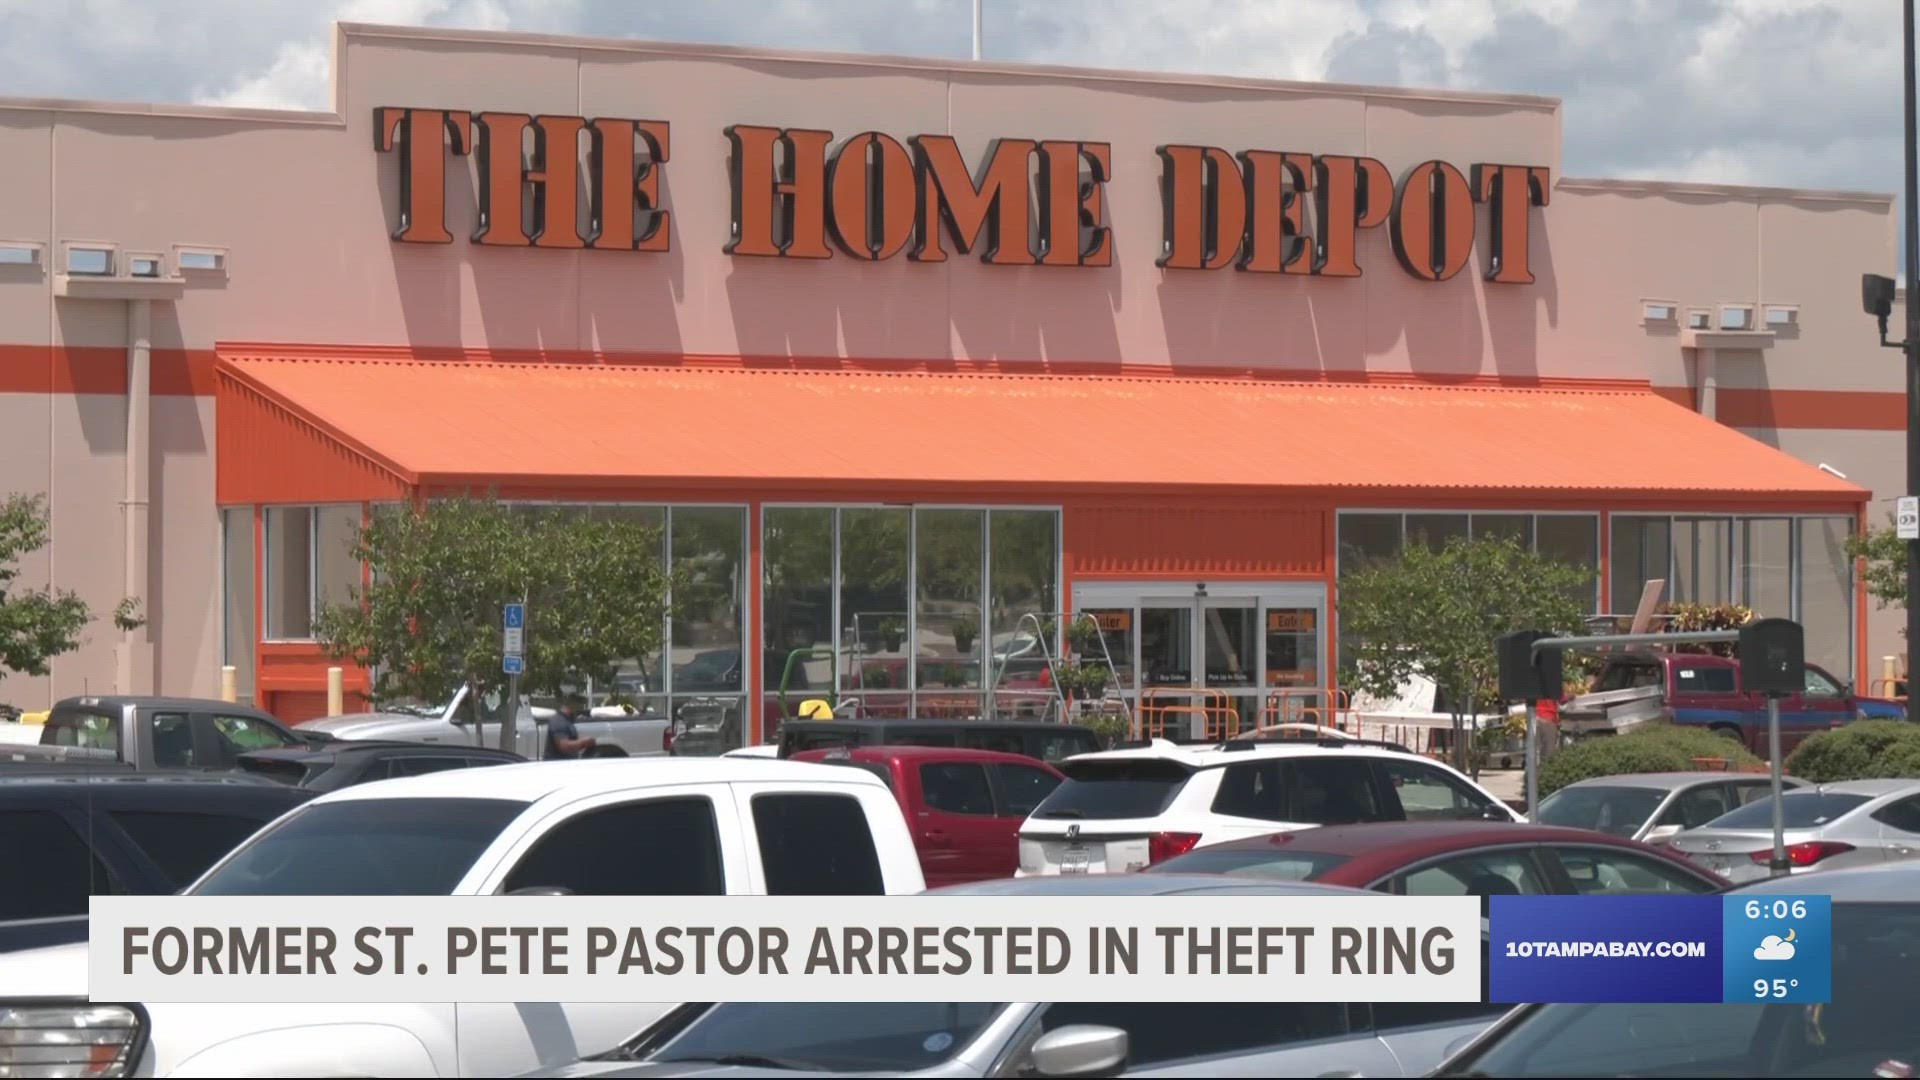 Authorities say the pastor founded a local church, ran a halfway house for recovering addicts and stole millions of dollars in retail goods.